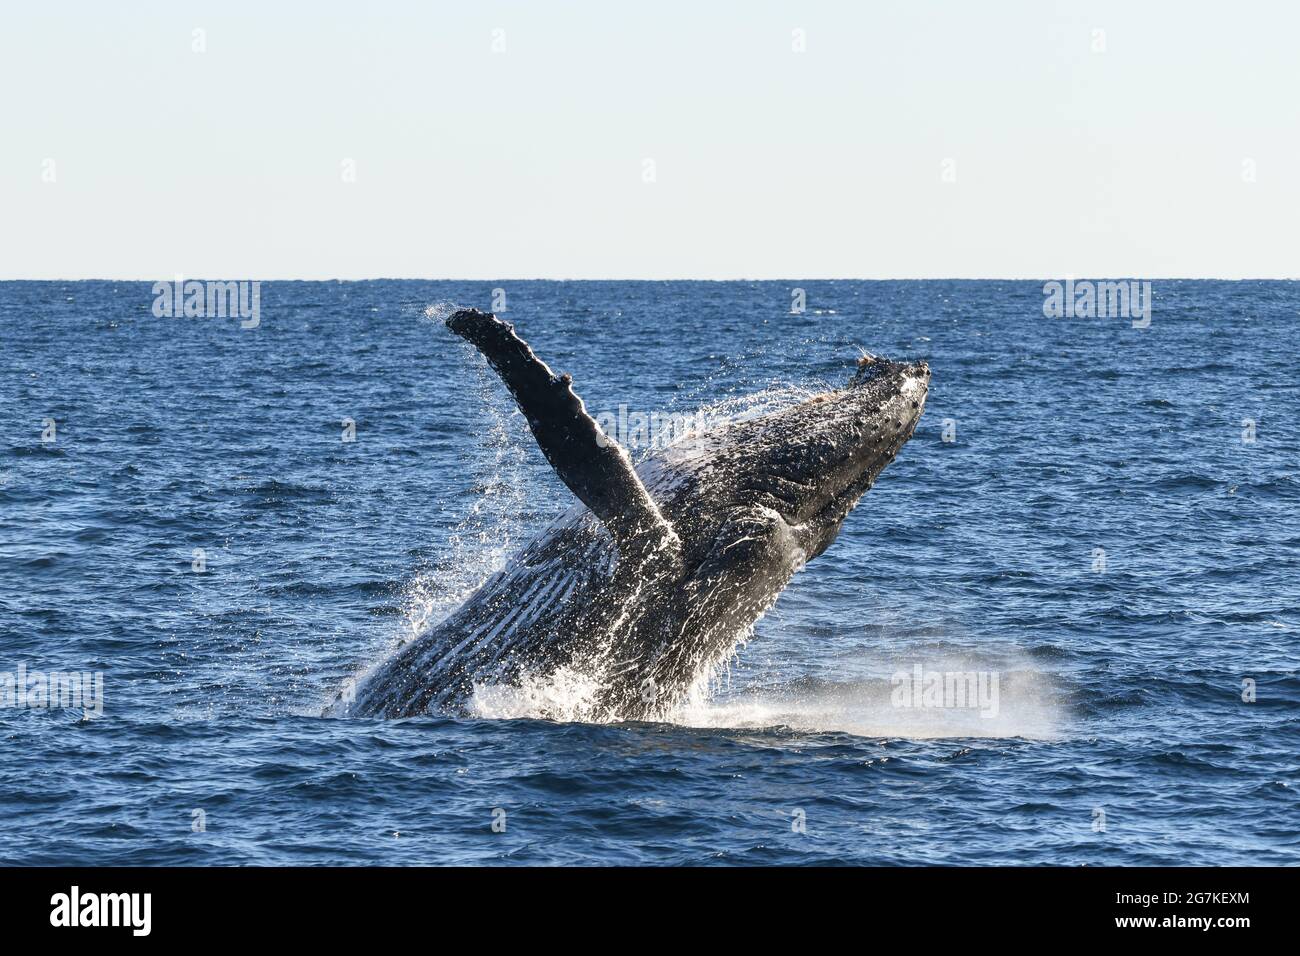 Whale about to land back into the ocean after breaching Stock Photo